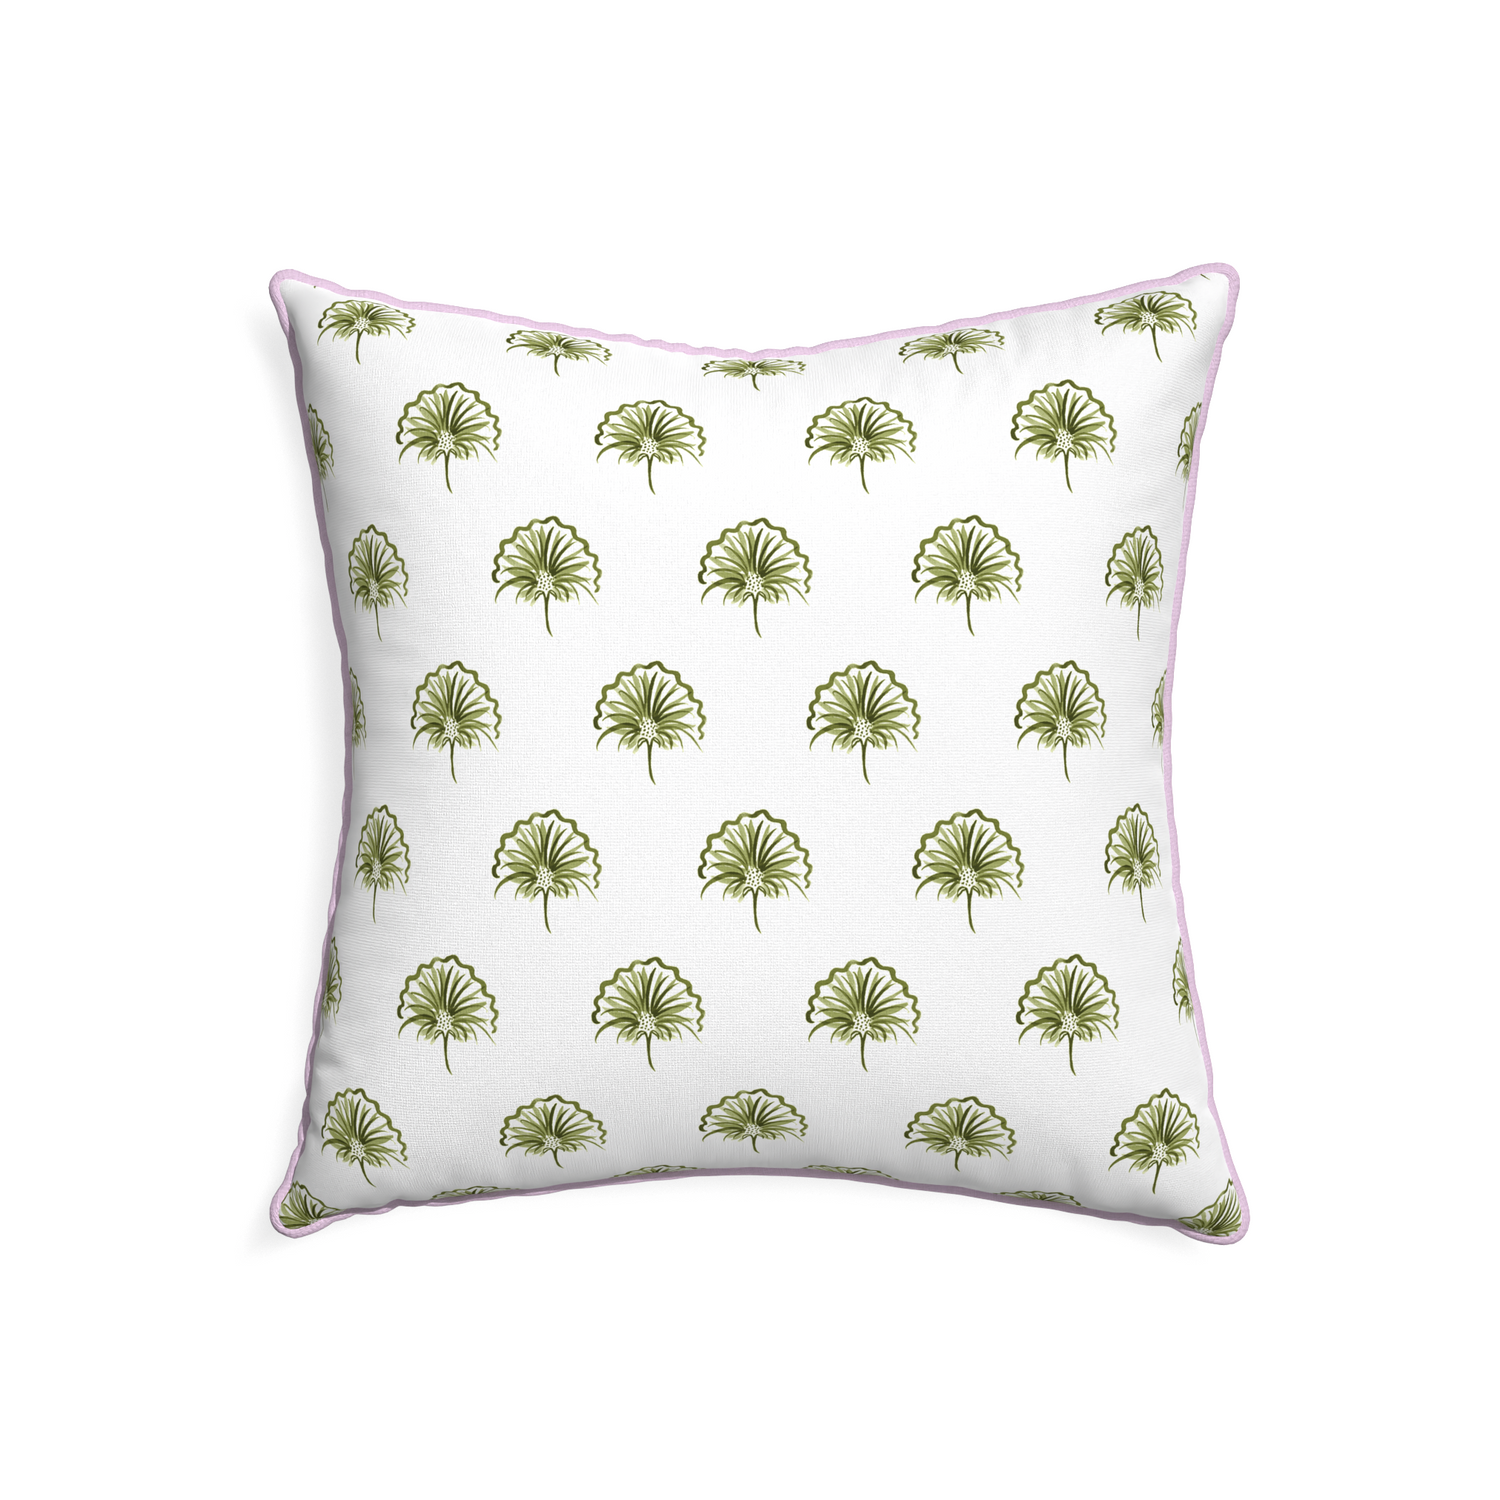 22-square penelope moss custom green floralpillow with l piping on white background